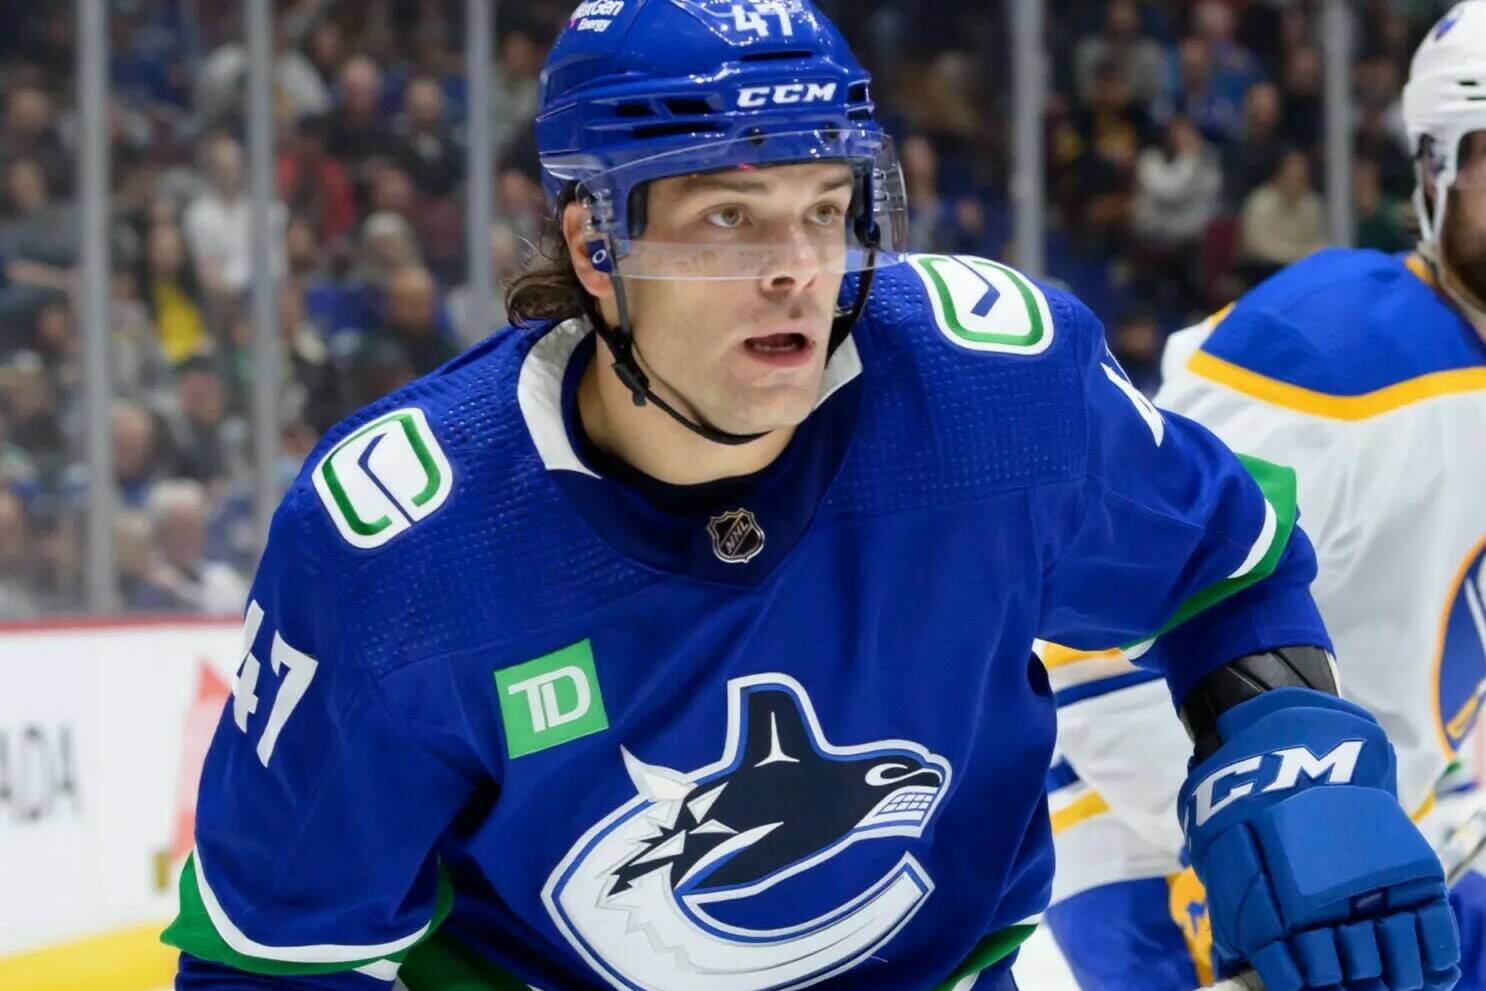 Surrey’s Noah Juulsen is hoping to establish himself as an NHL regular with the Canucks. photo courtesy of Vancouver Canucks